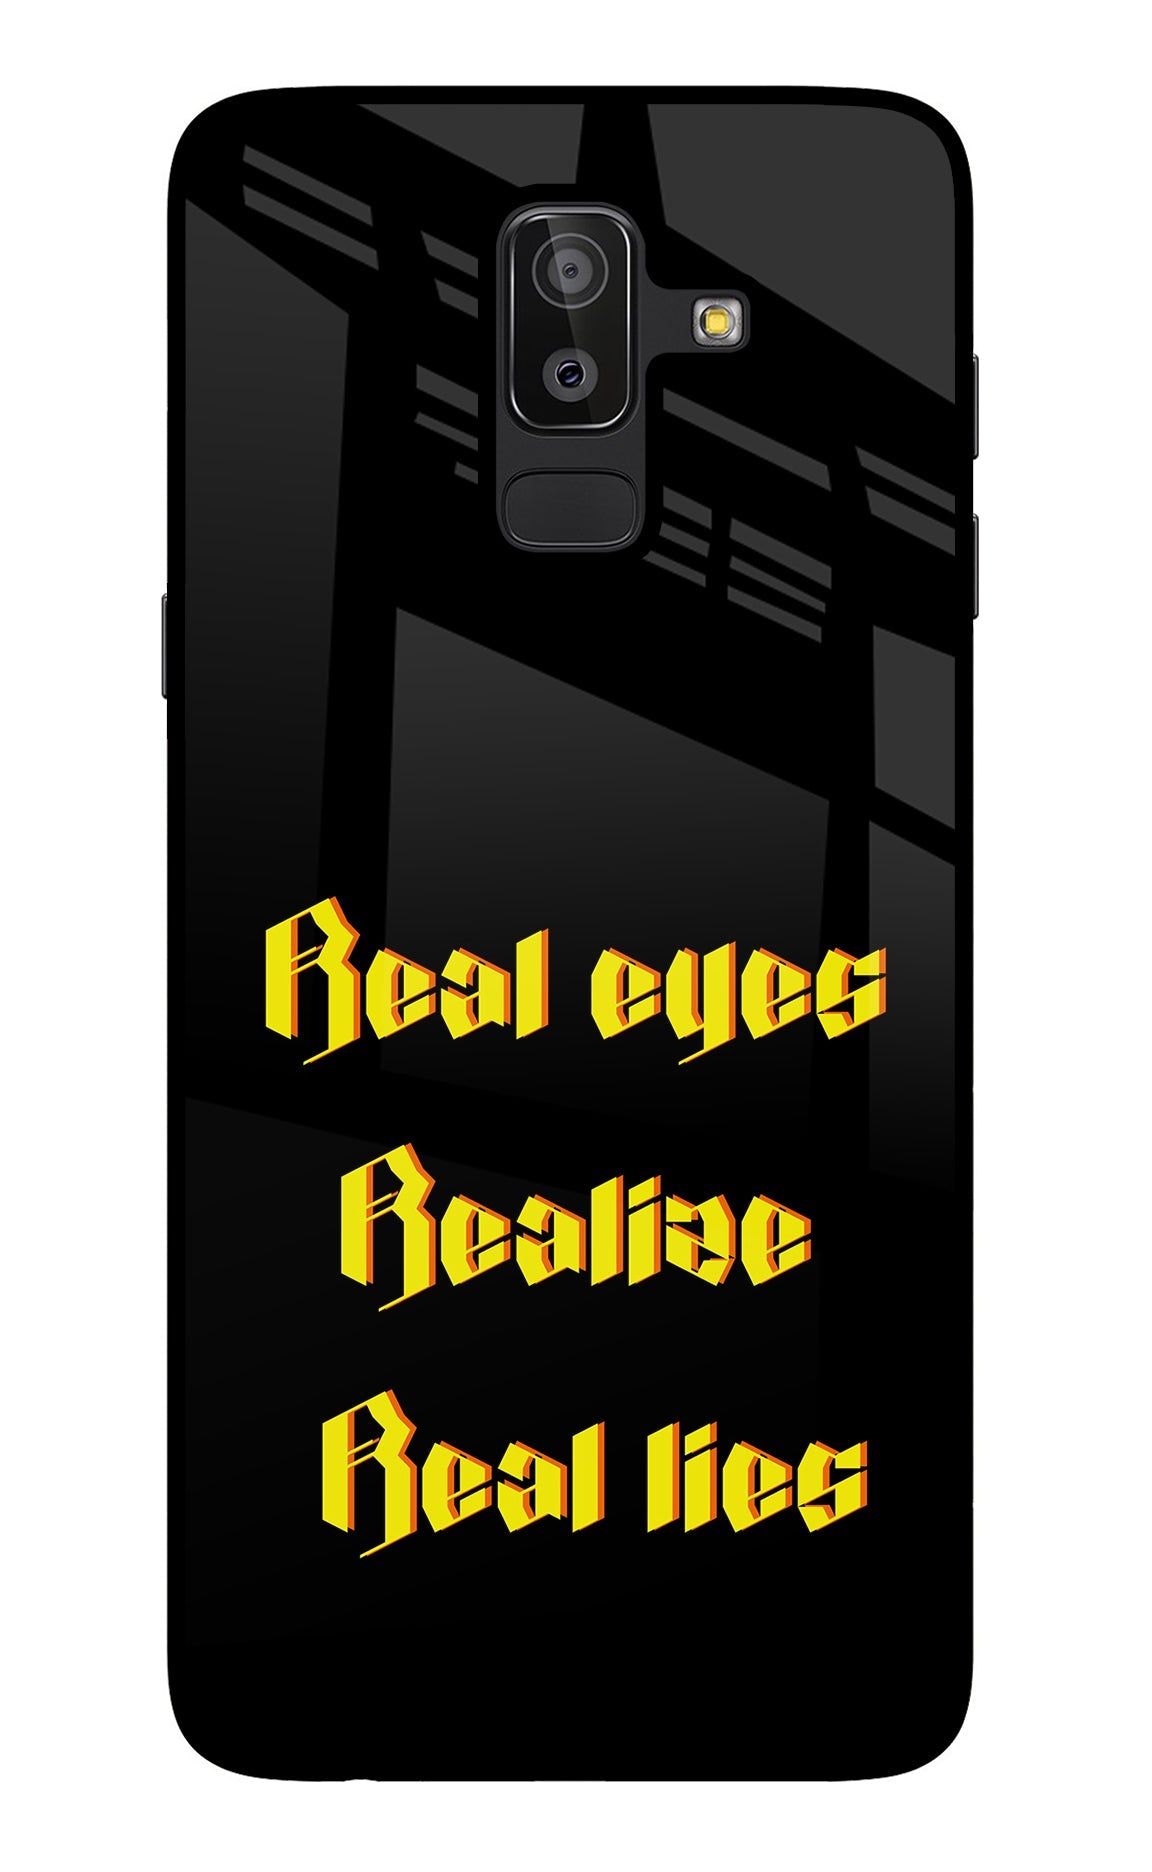 Real Eyes Realize Real Lies Samsung J8 Glass Case